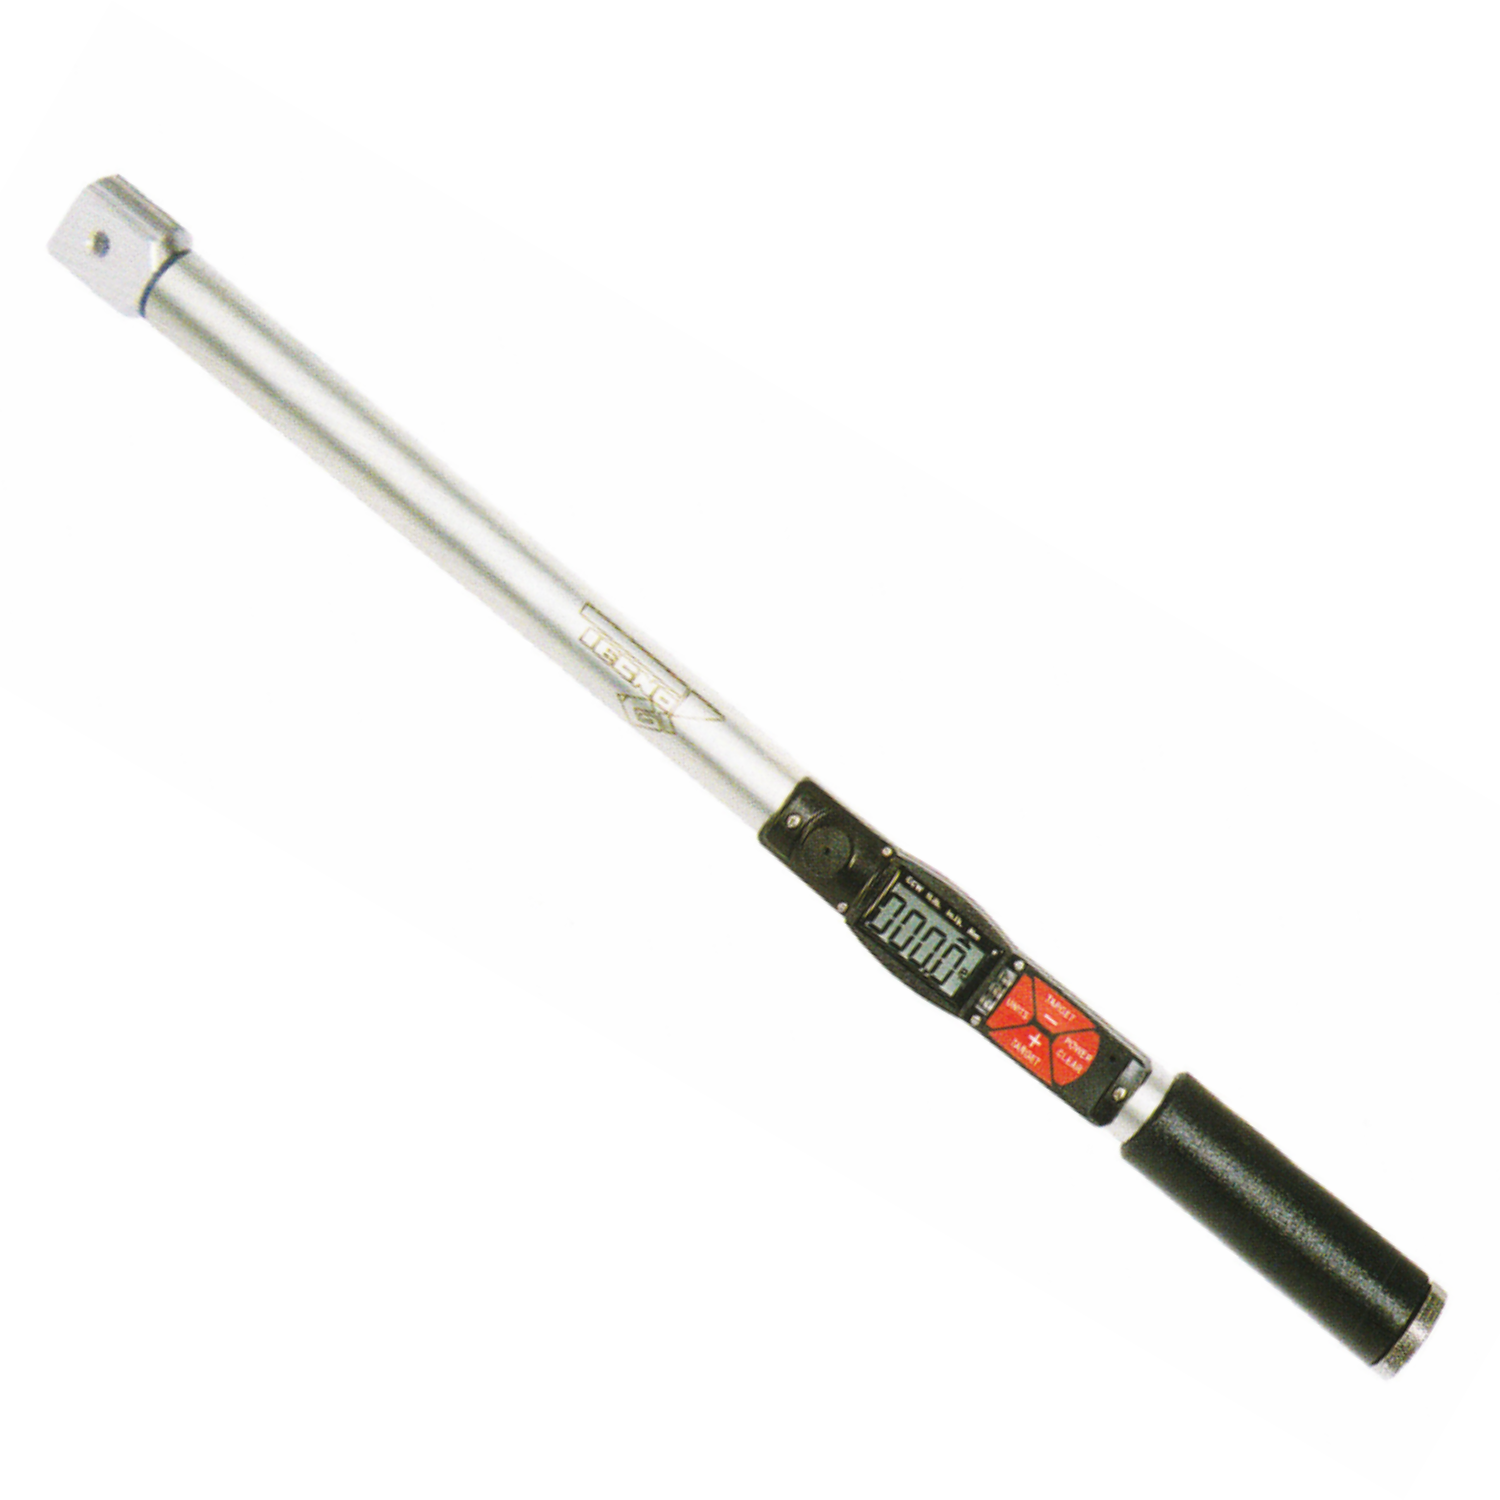 TECNOGI 3513F Digital Torque Wrench with Rotating Head 431mm - Premium Digital Torque Wrench from TECNOGI - Shop now at Yew Aik.